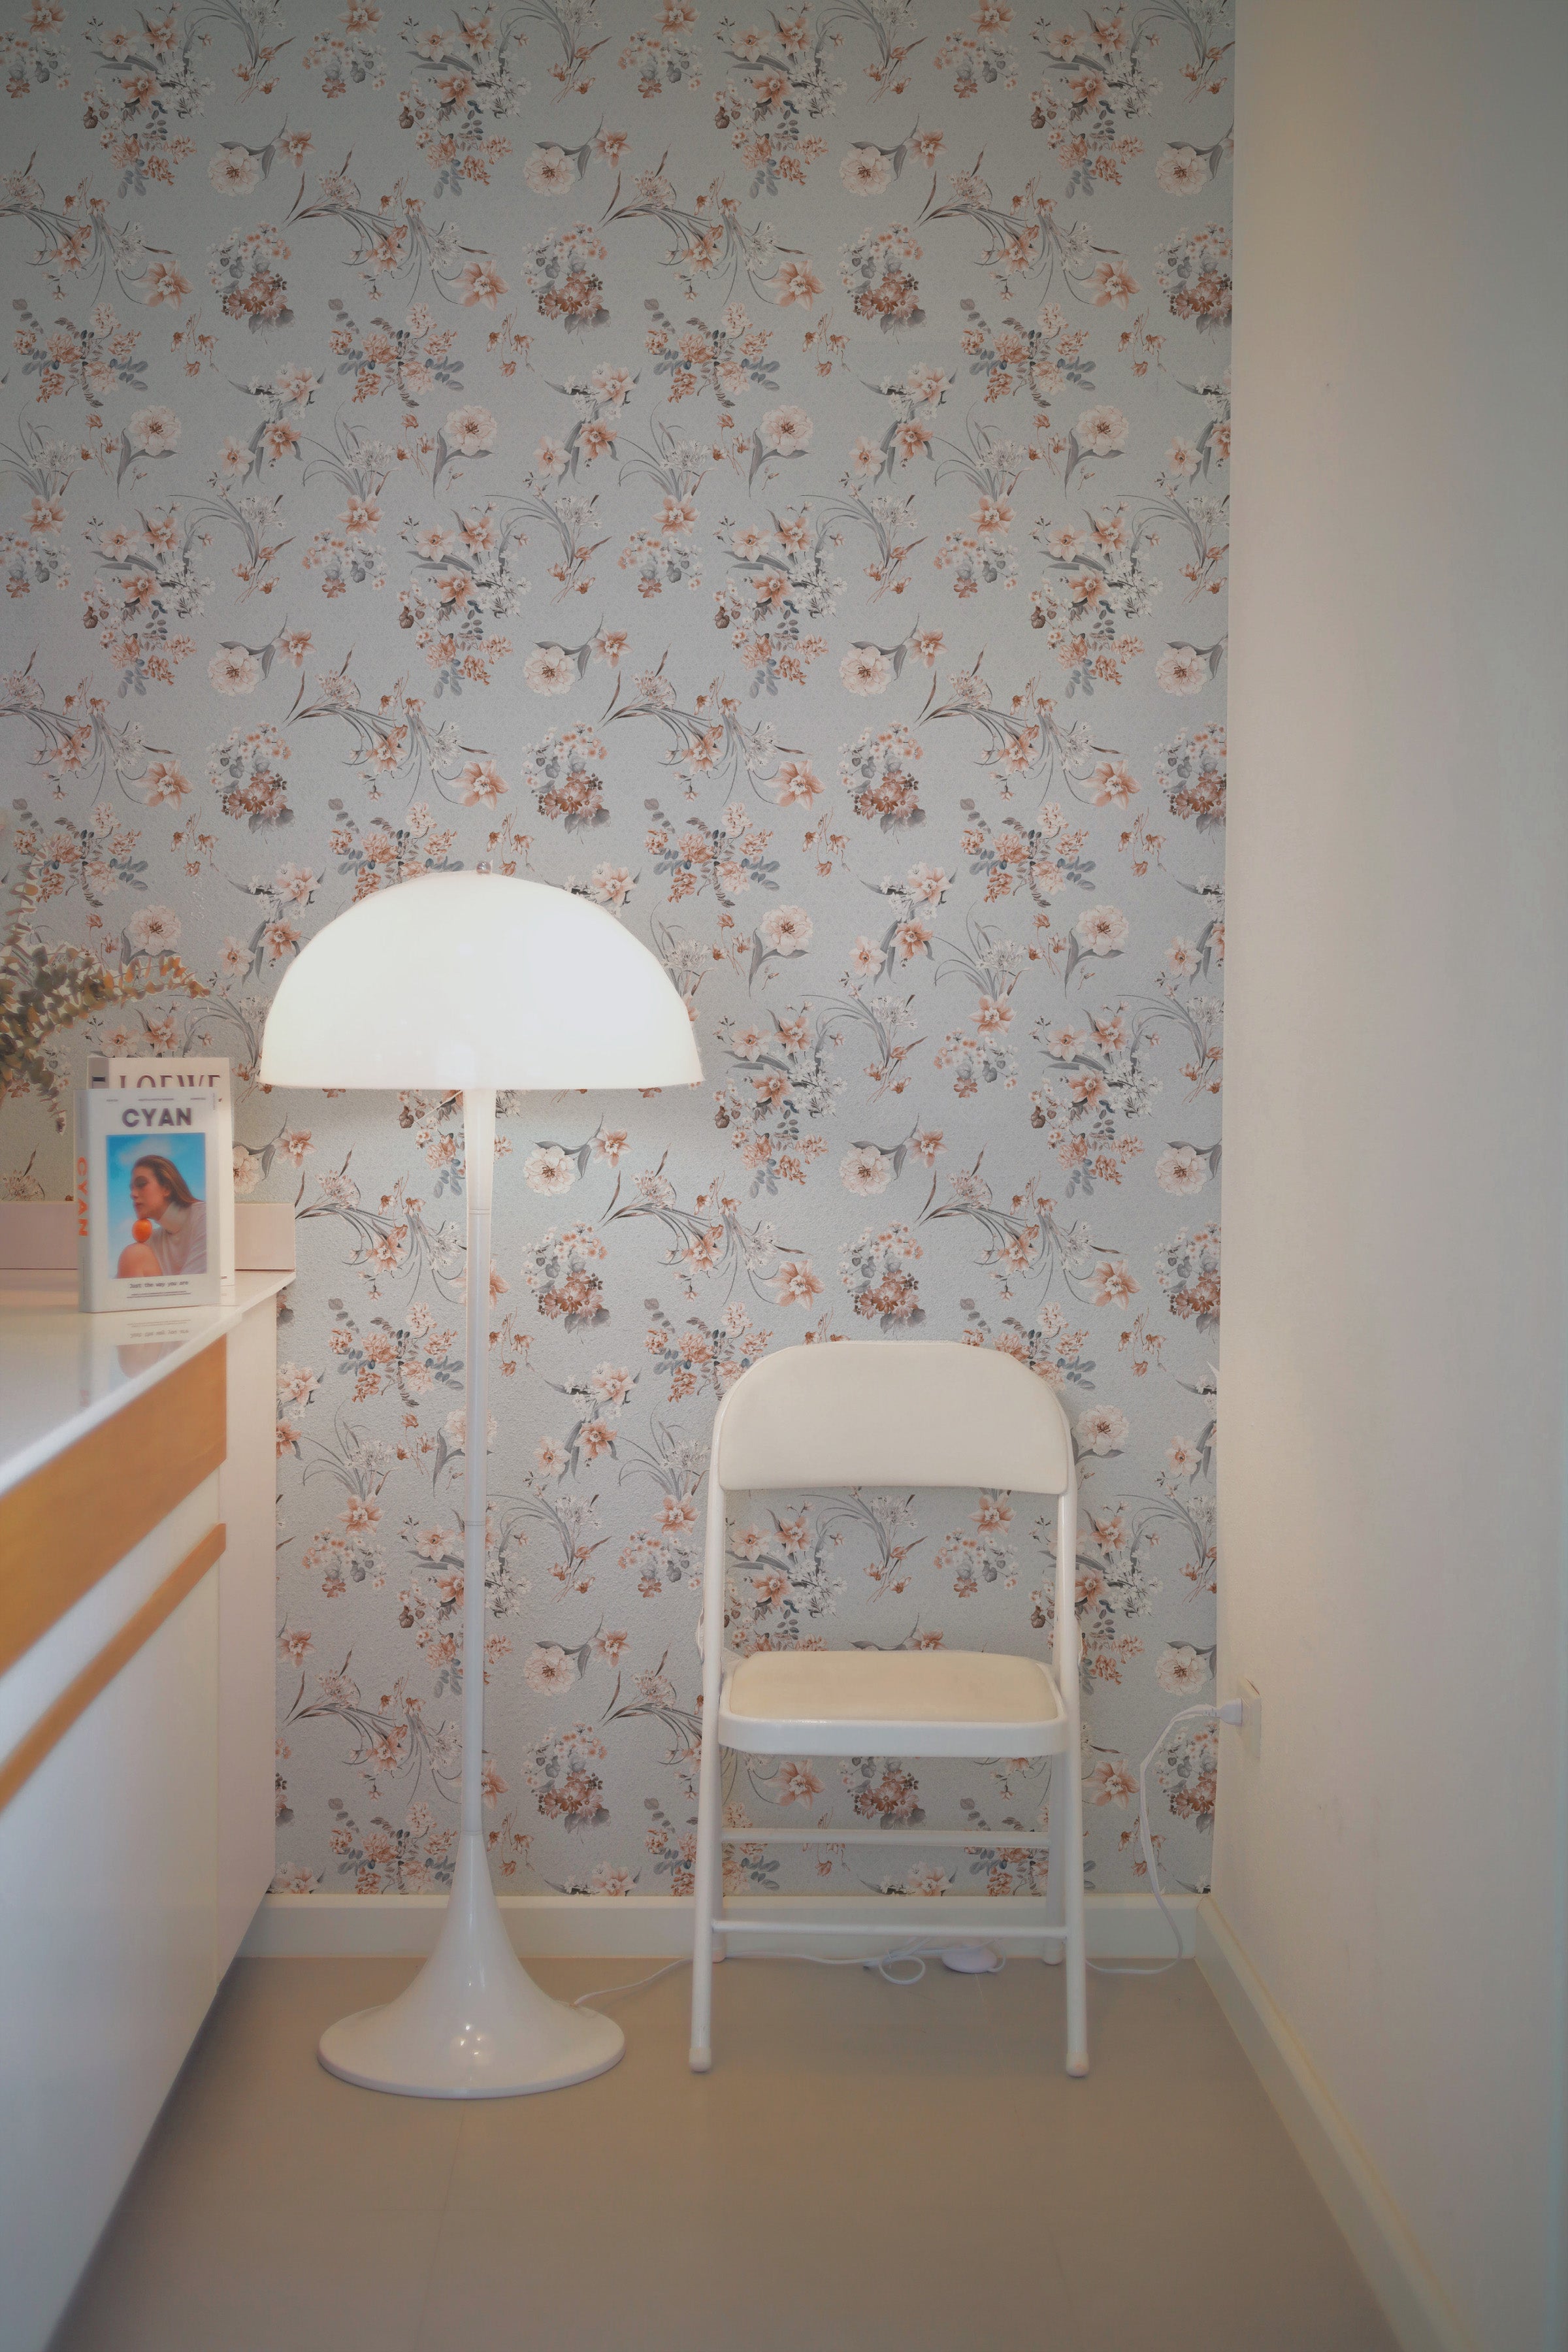 A cozy corner in a modern room featuring the Boudoir Blooms Wallpaper, adorned with a pattern of delicate floral blooms in shades of peach and gray. A sleek white chair and a stylish floor lamp complement the wallpaper, creating a serene and inviting space.